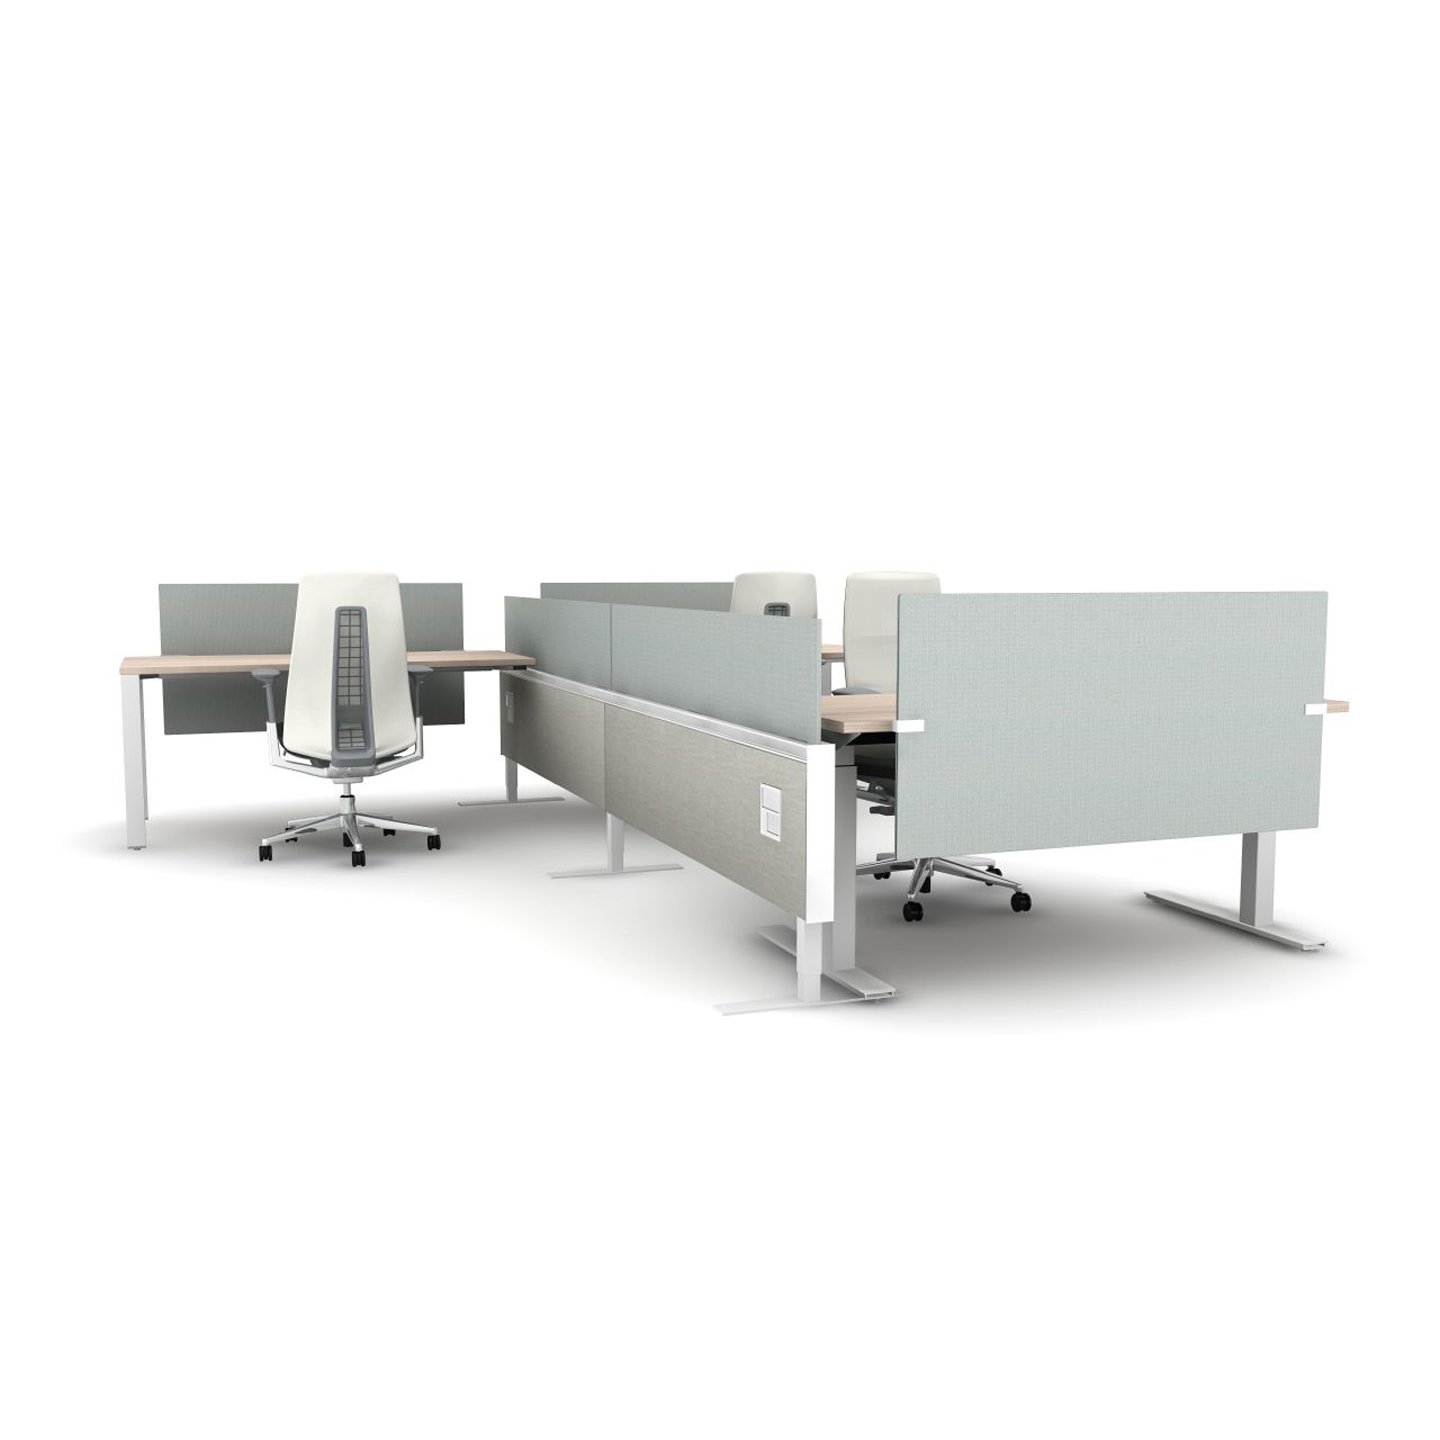 Haworth Compose Beam Workspace divider in grey in office mock up with fern chair and height adjustable table